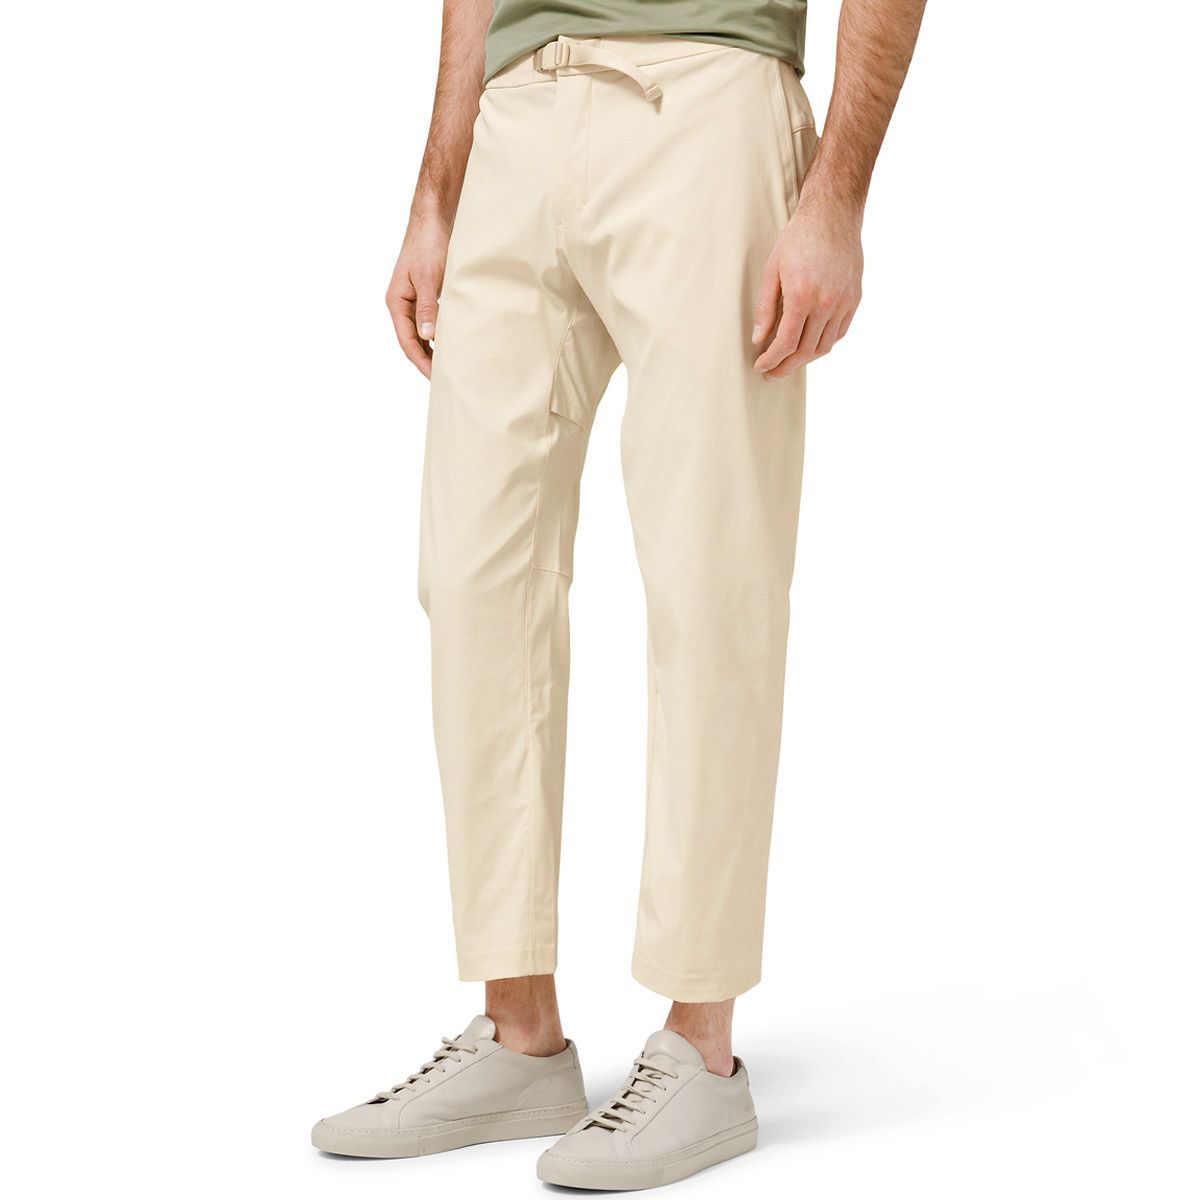 Lululemon Relaxed Fit Belted Stretch Pant